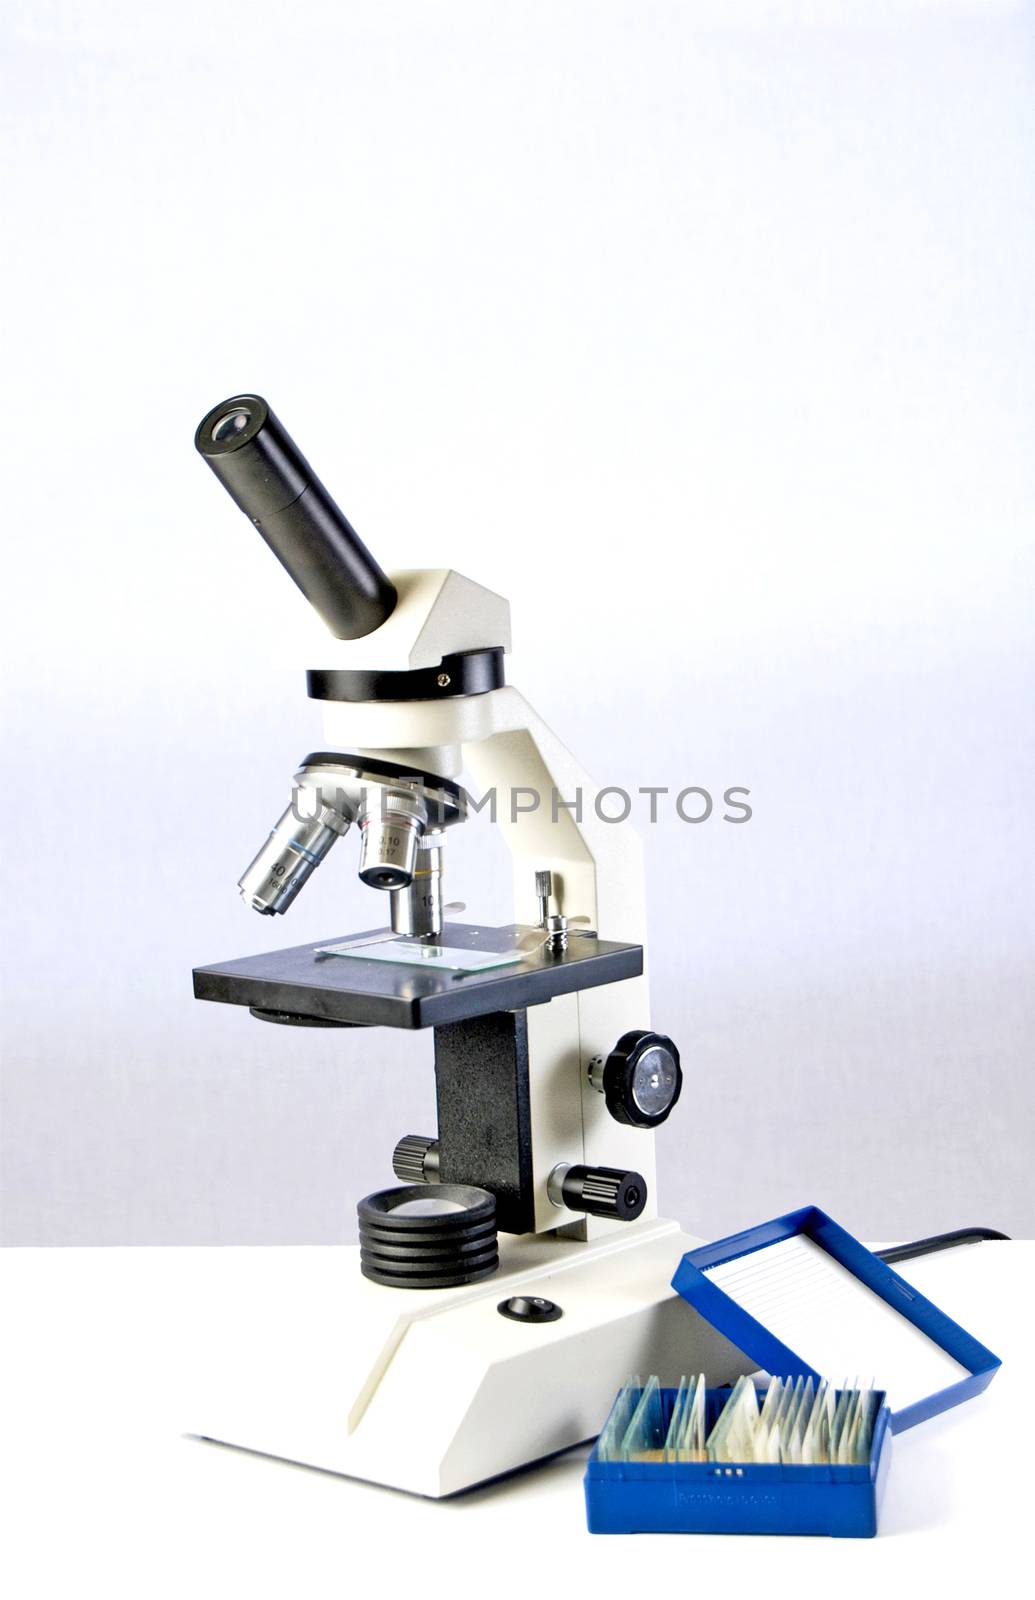 Student Microscope by rcarner